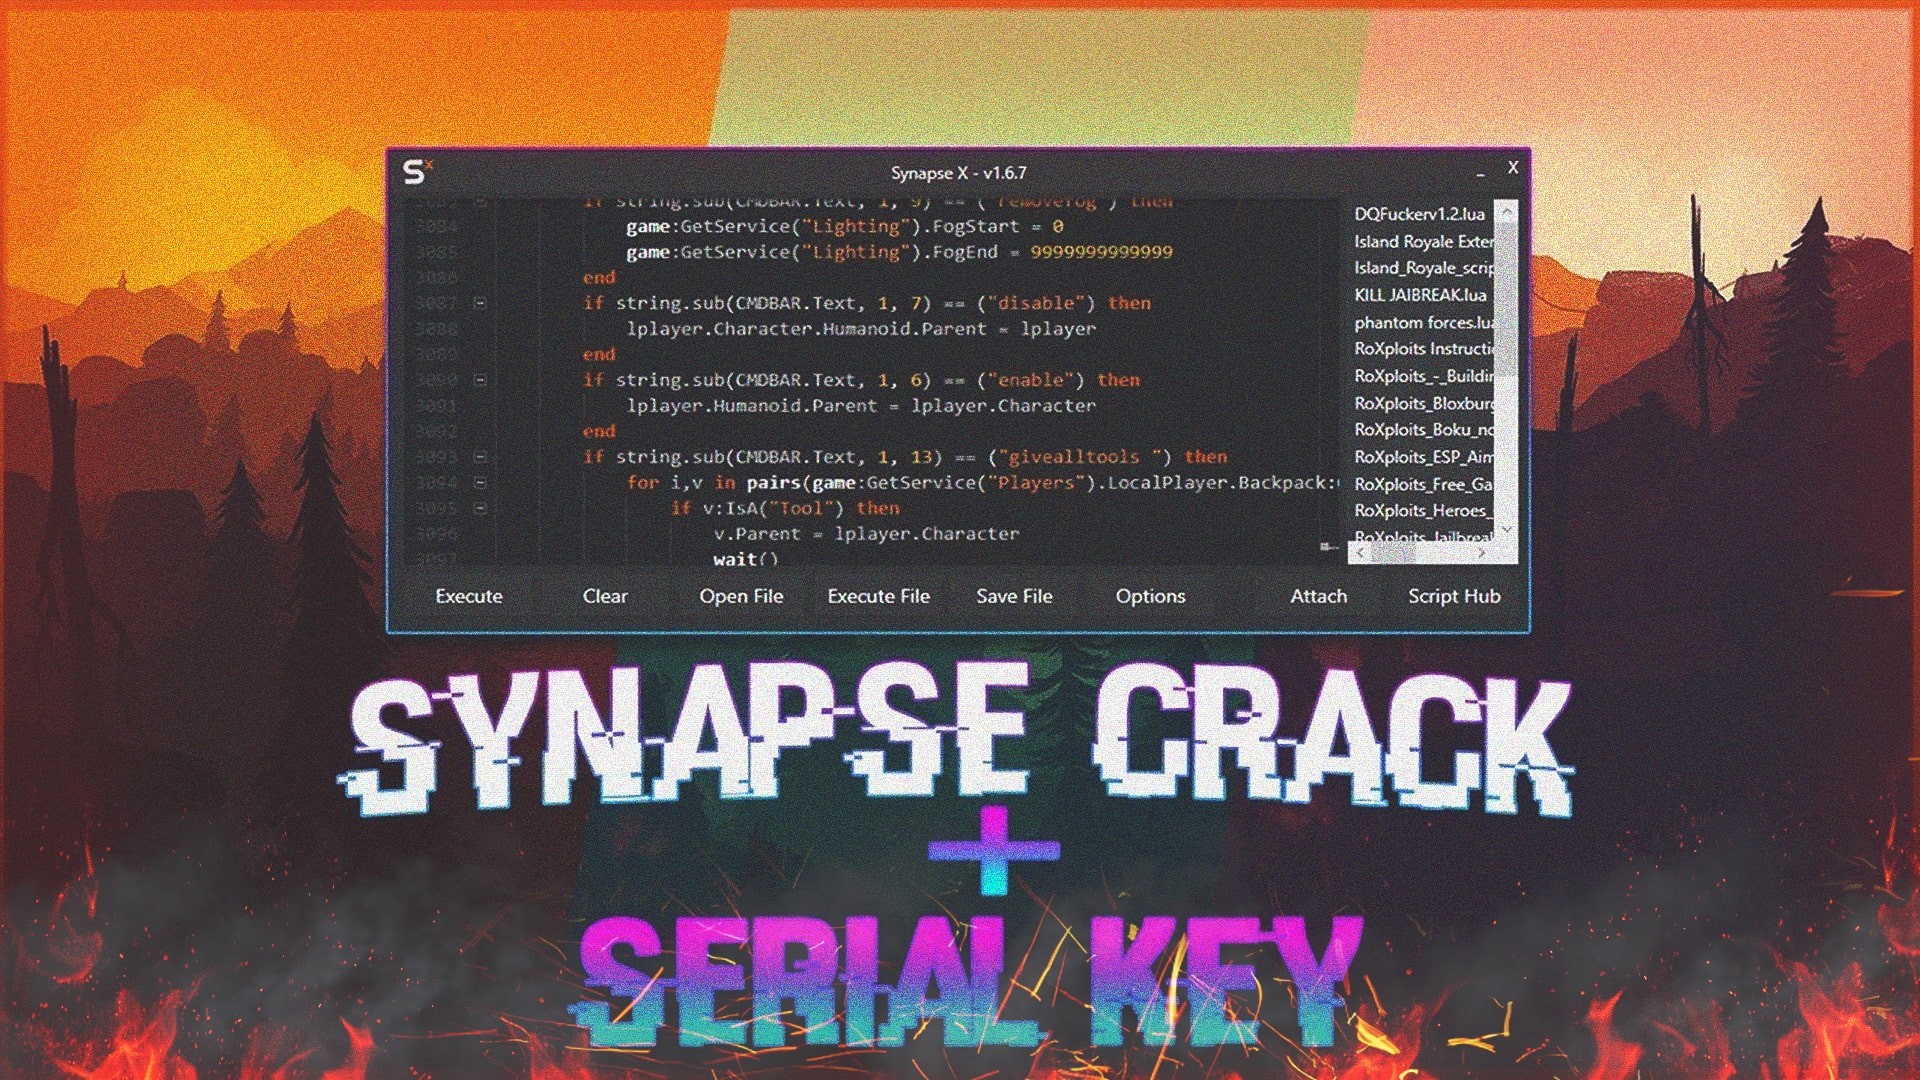 Then tools. Synapse x cracked 2022. Синапс РОБЛОКС. Synapse x cracked Roblox. Synapse x.